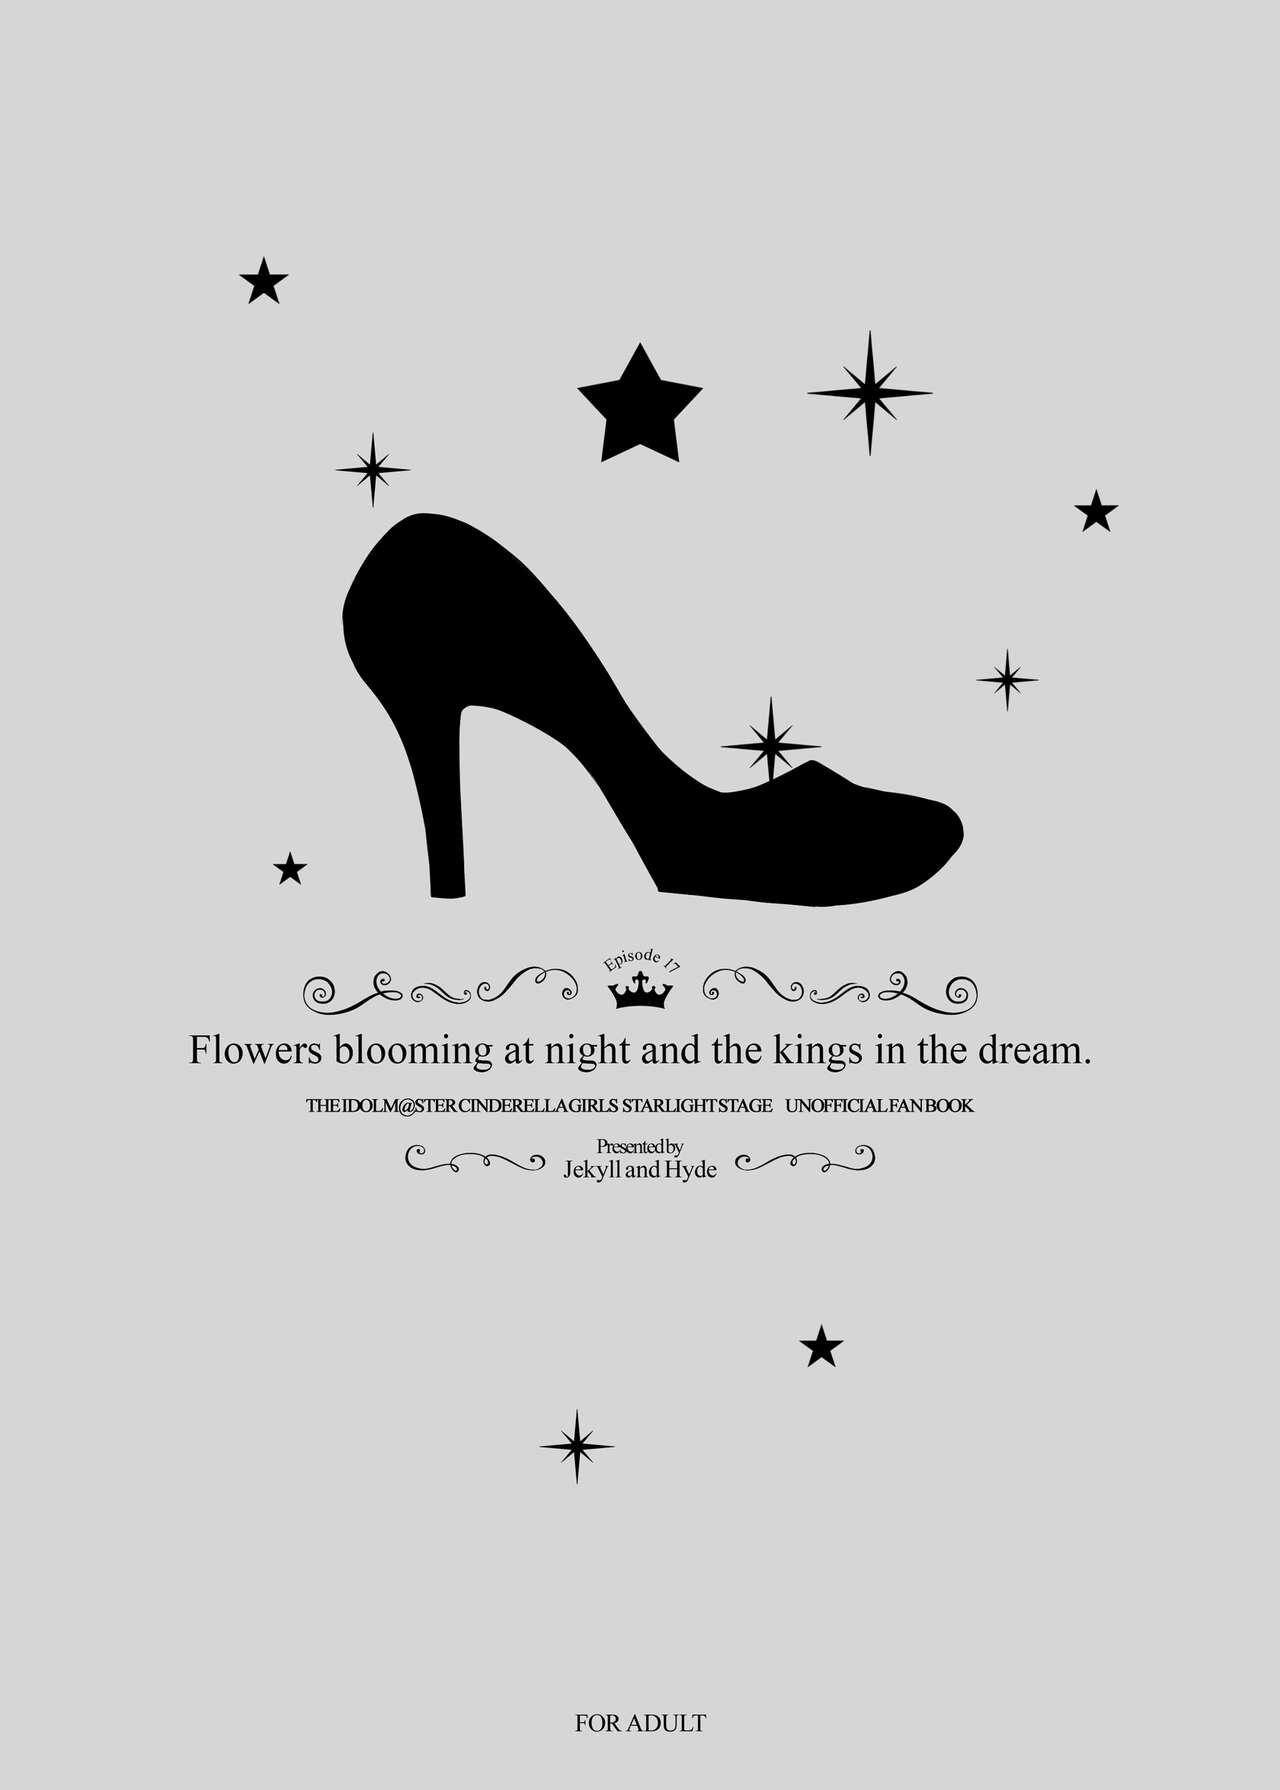 Flowers blooming at night and the kings in the dream. 2